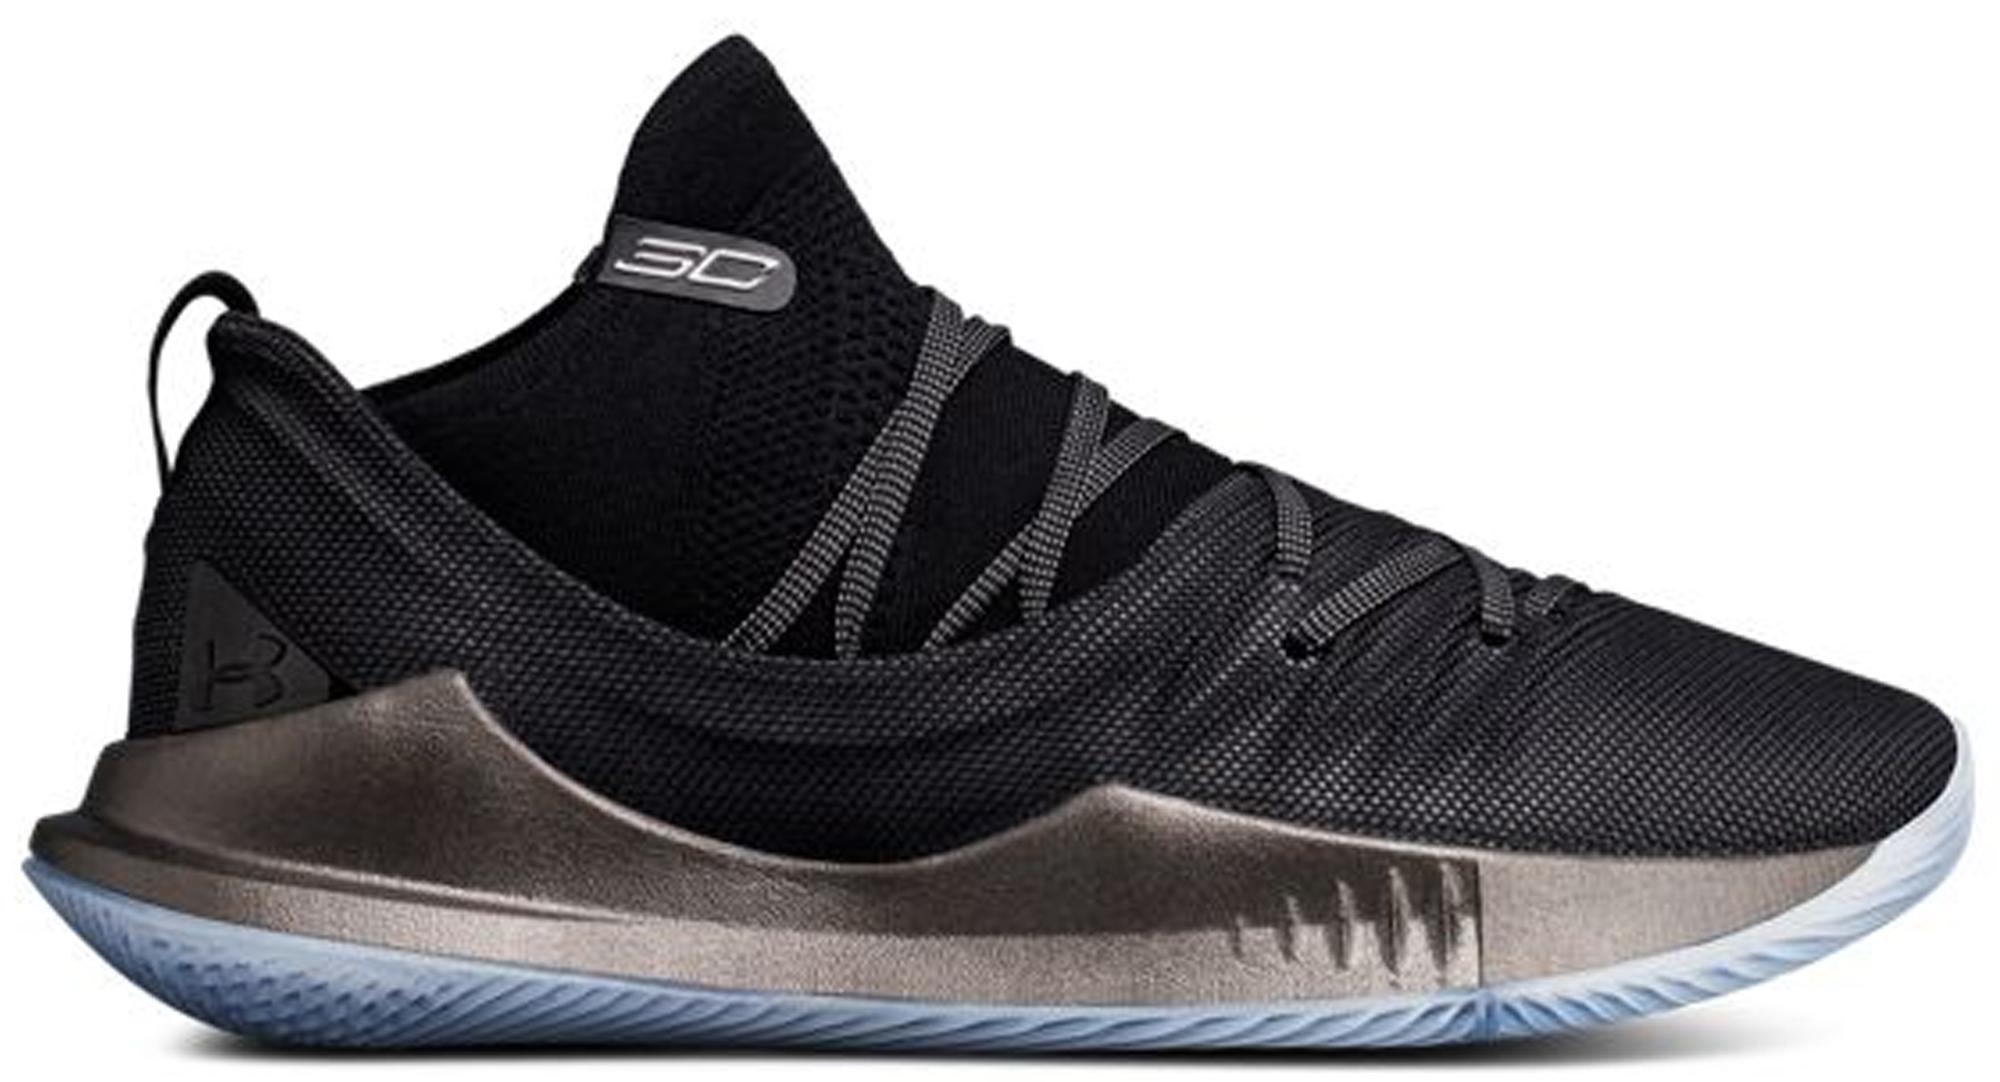 Under Armour Curry 5 Pi Day